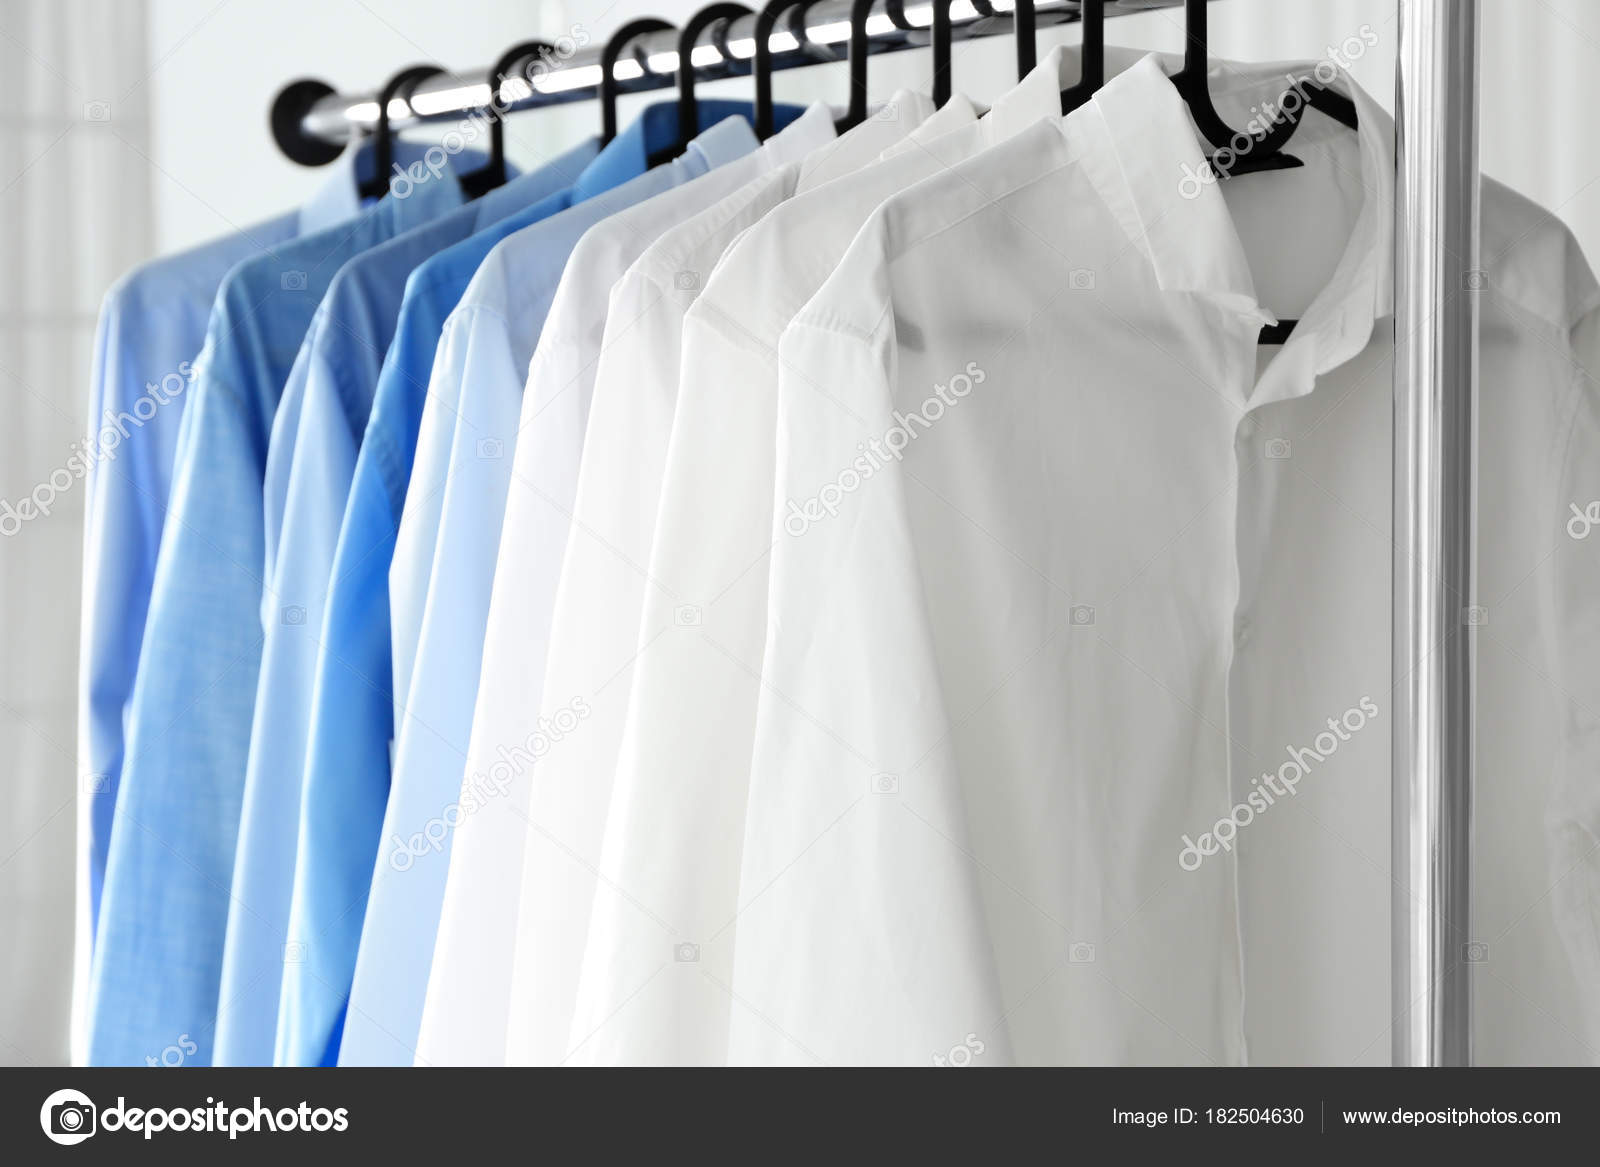 Rack with clean shirts in laundry — Stock Photo © belchonock #182504630